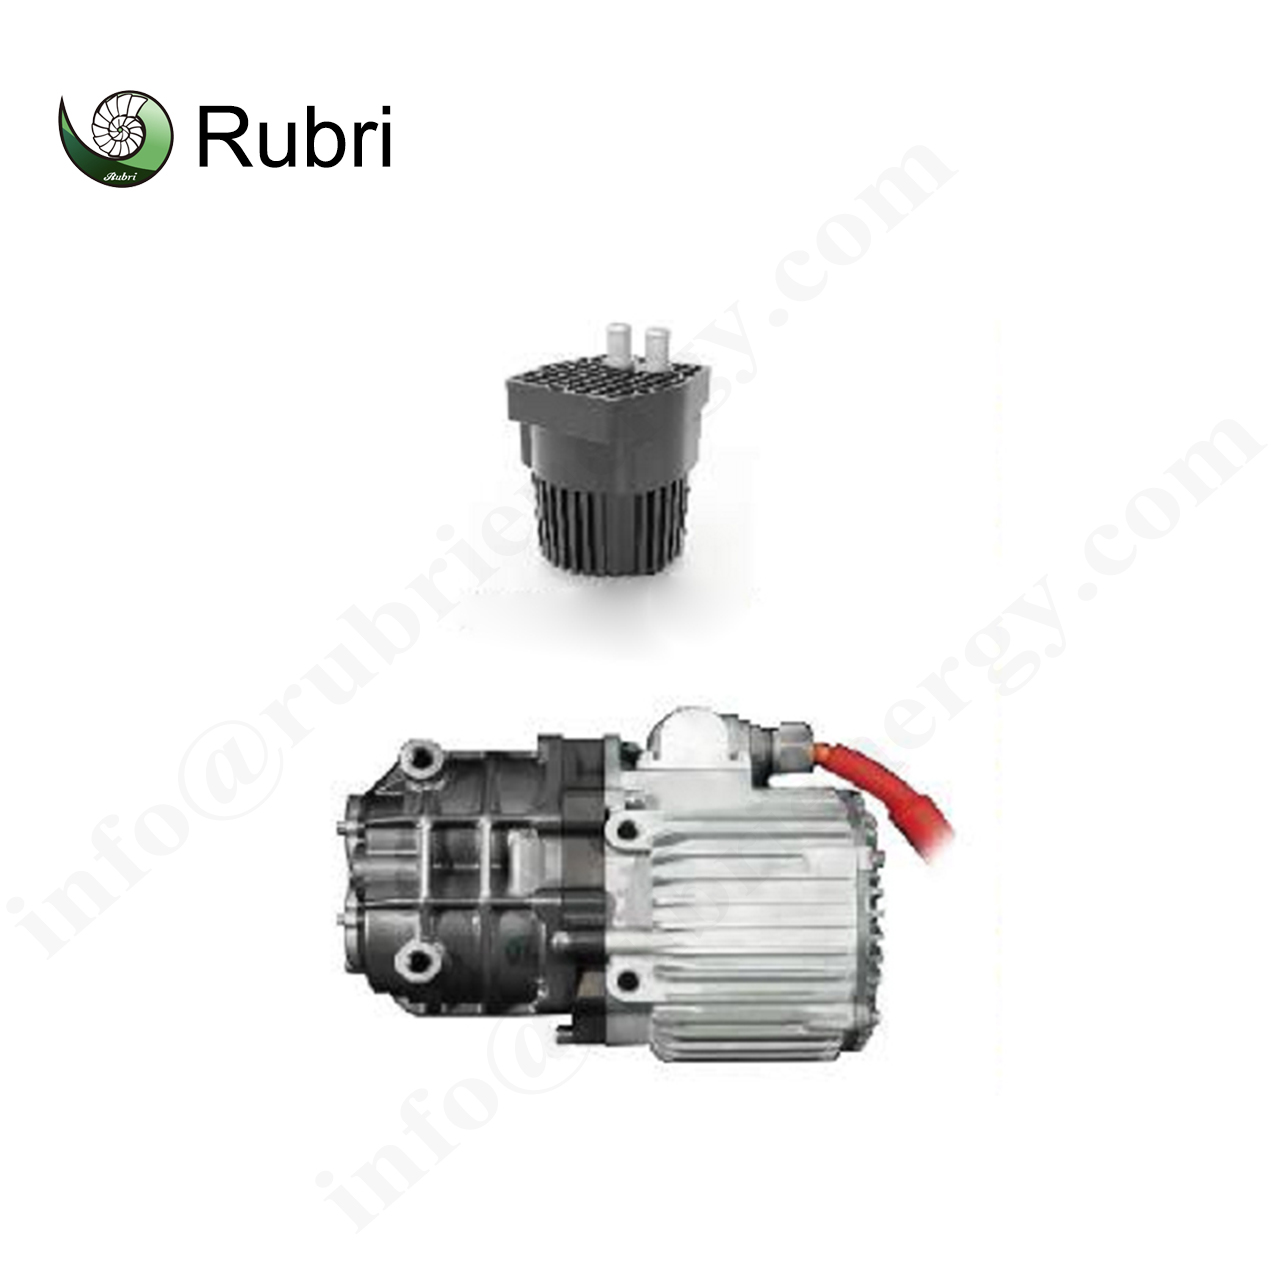 Hydrogen circulation pump for fuel cell system